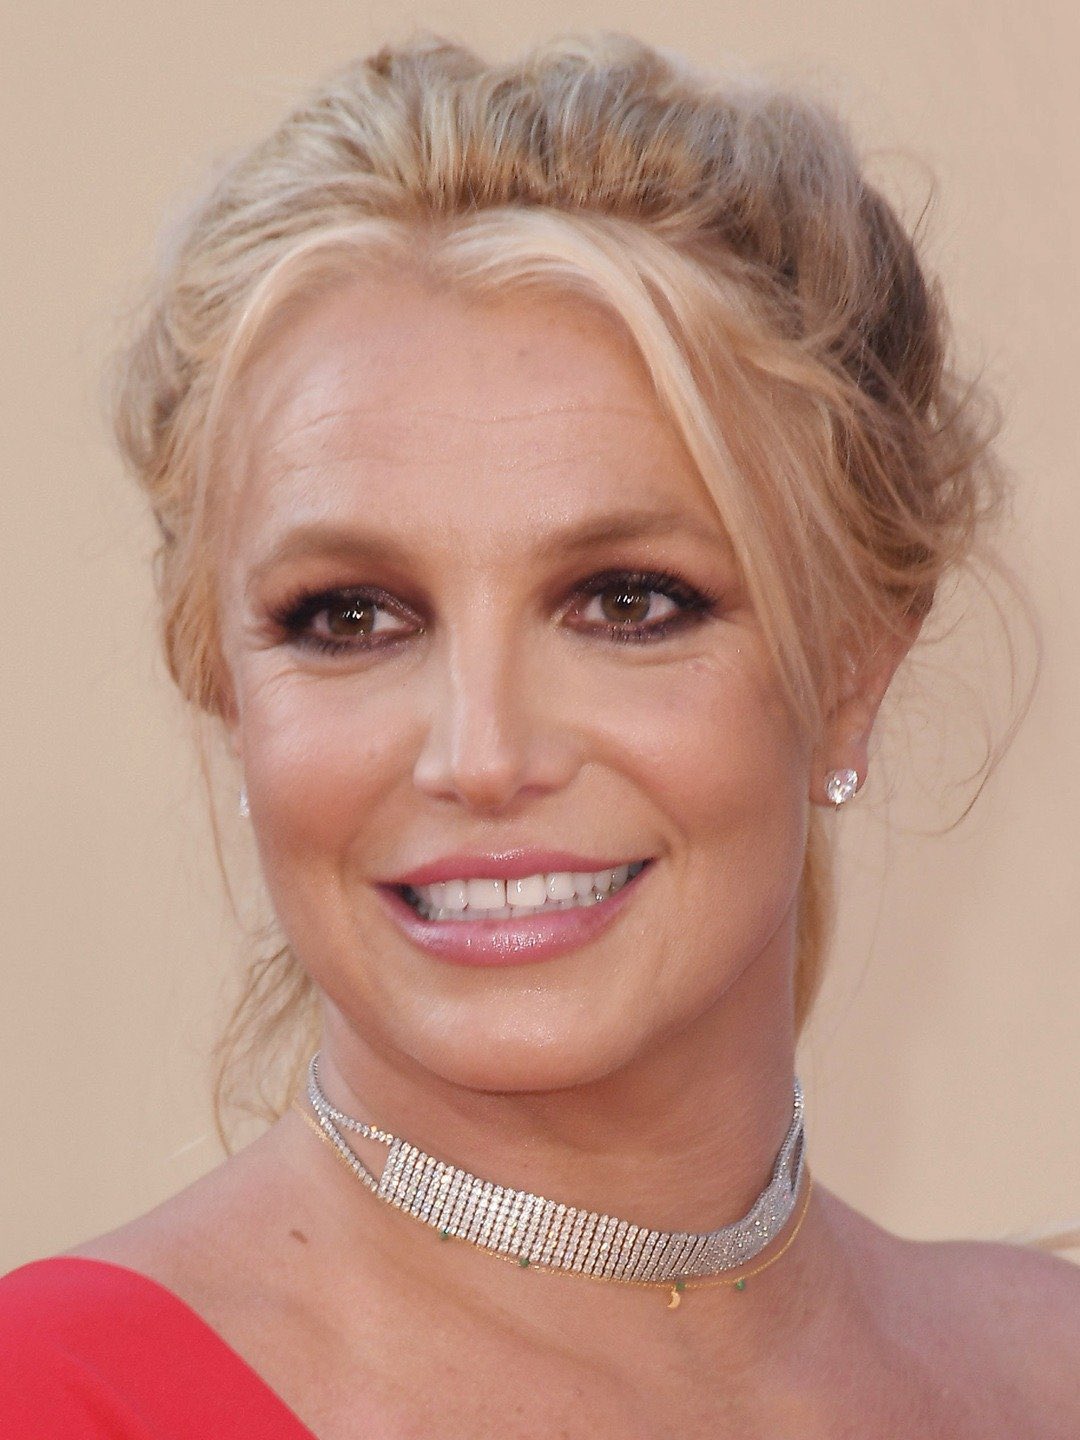 Happy Birthday to singer, songwriter, dancer and actress Britney Spears born on December 2, 1981 